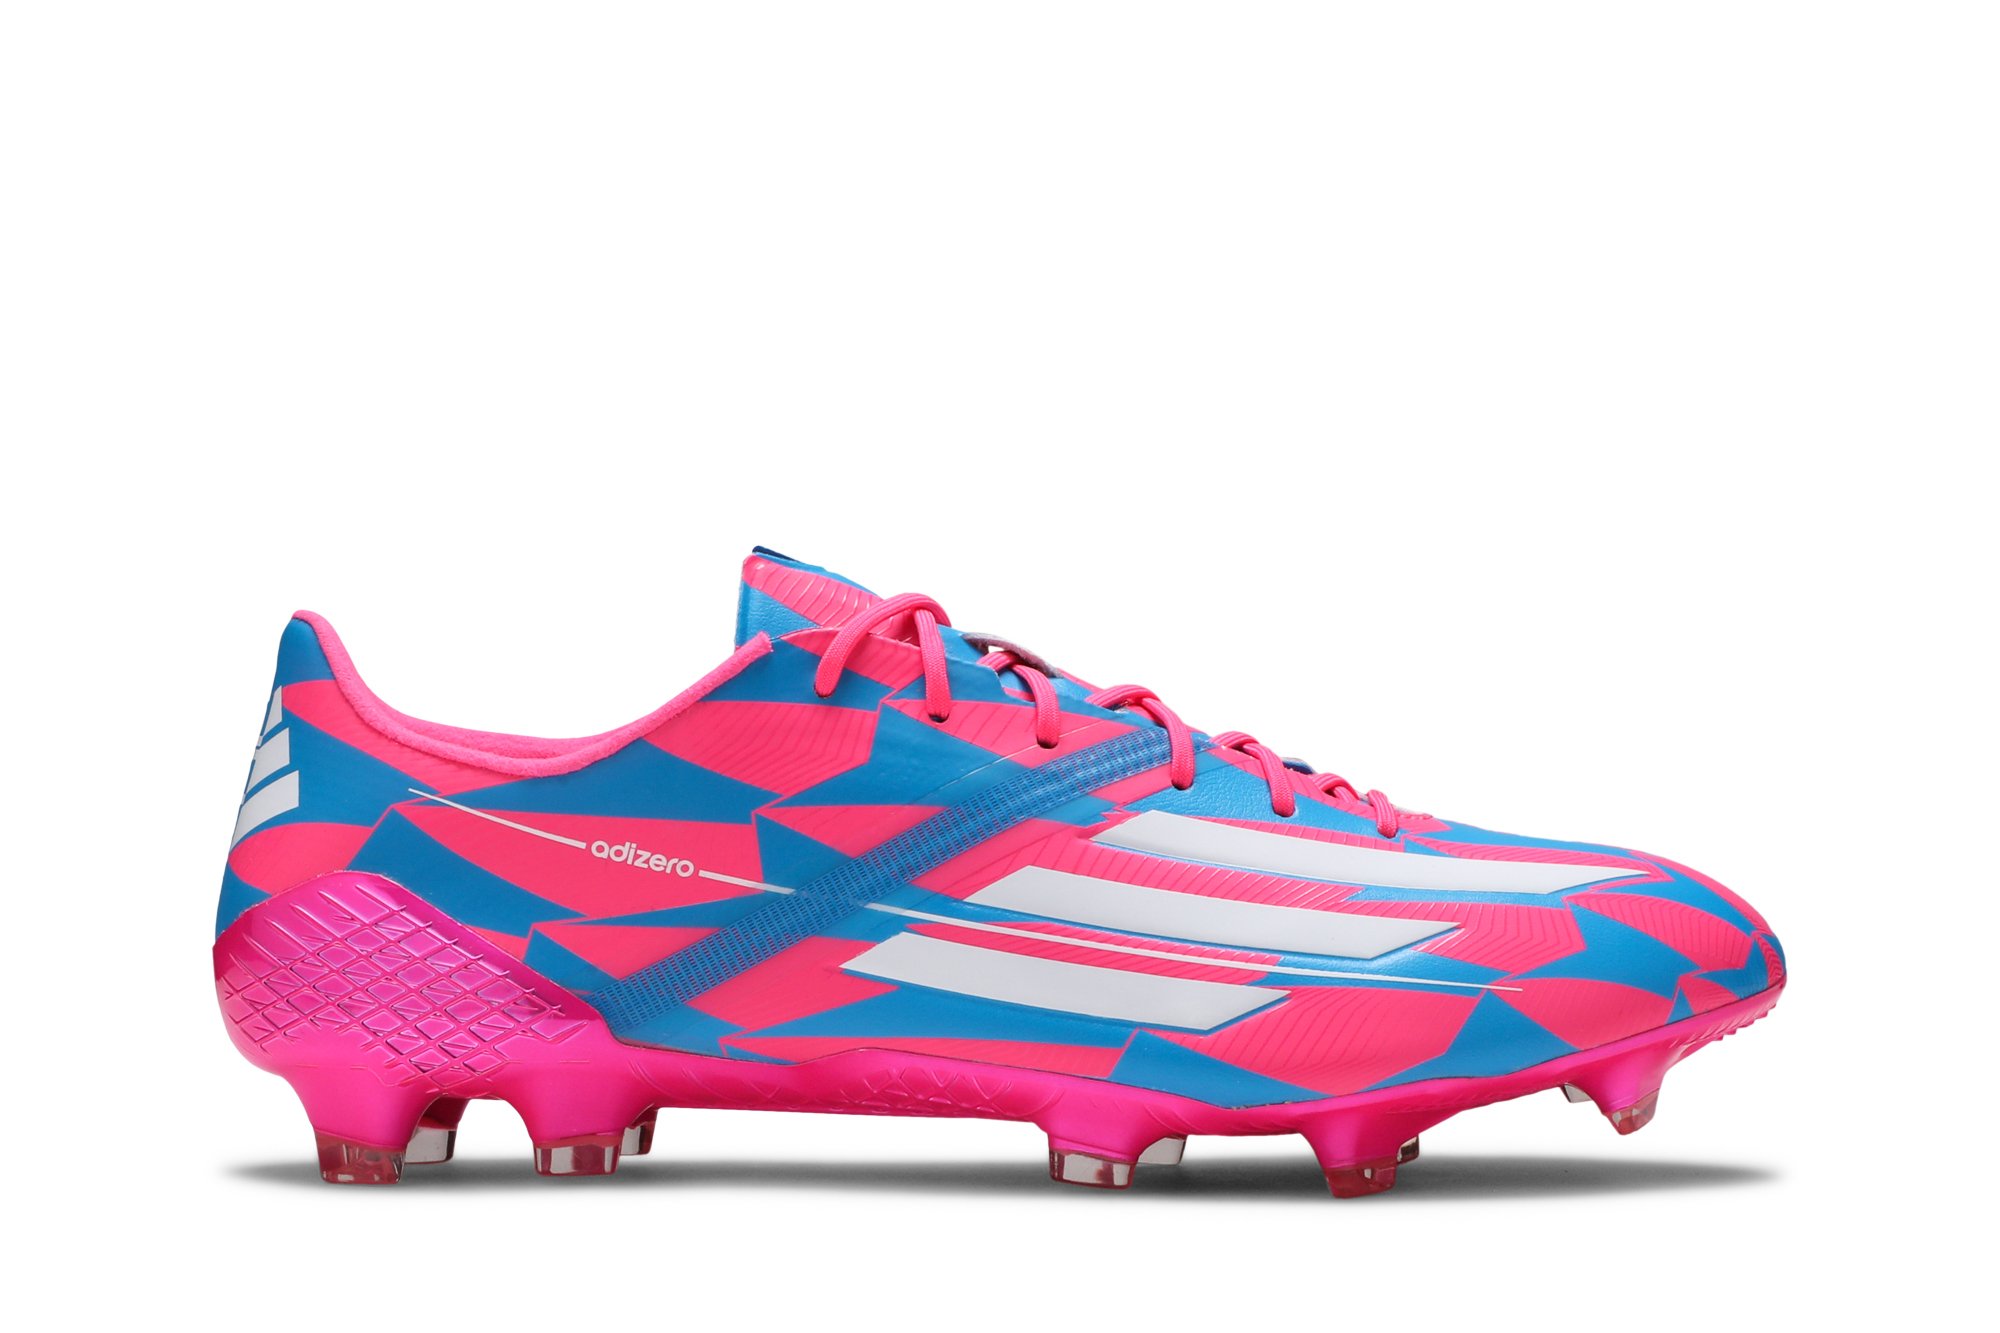 Adizero F50 Ghosted HybridTouch FG 'Memory Lane'